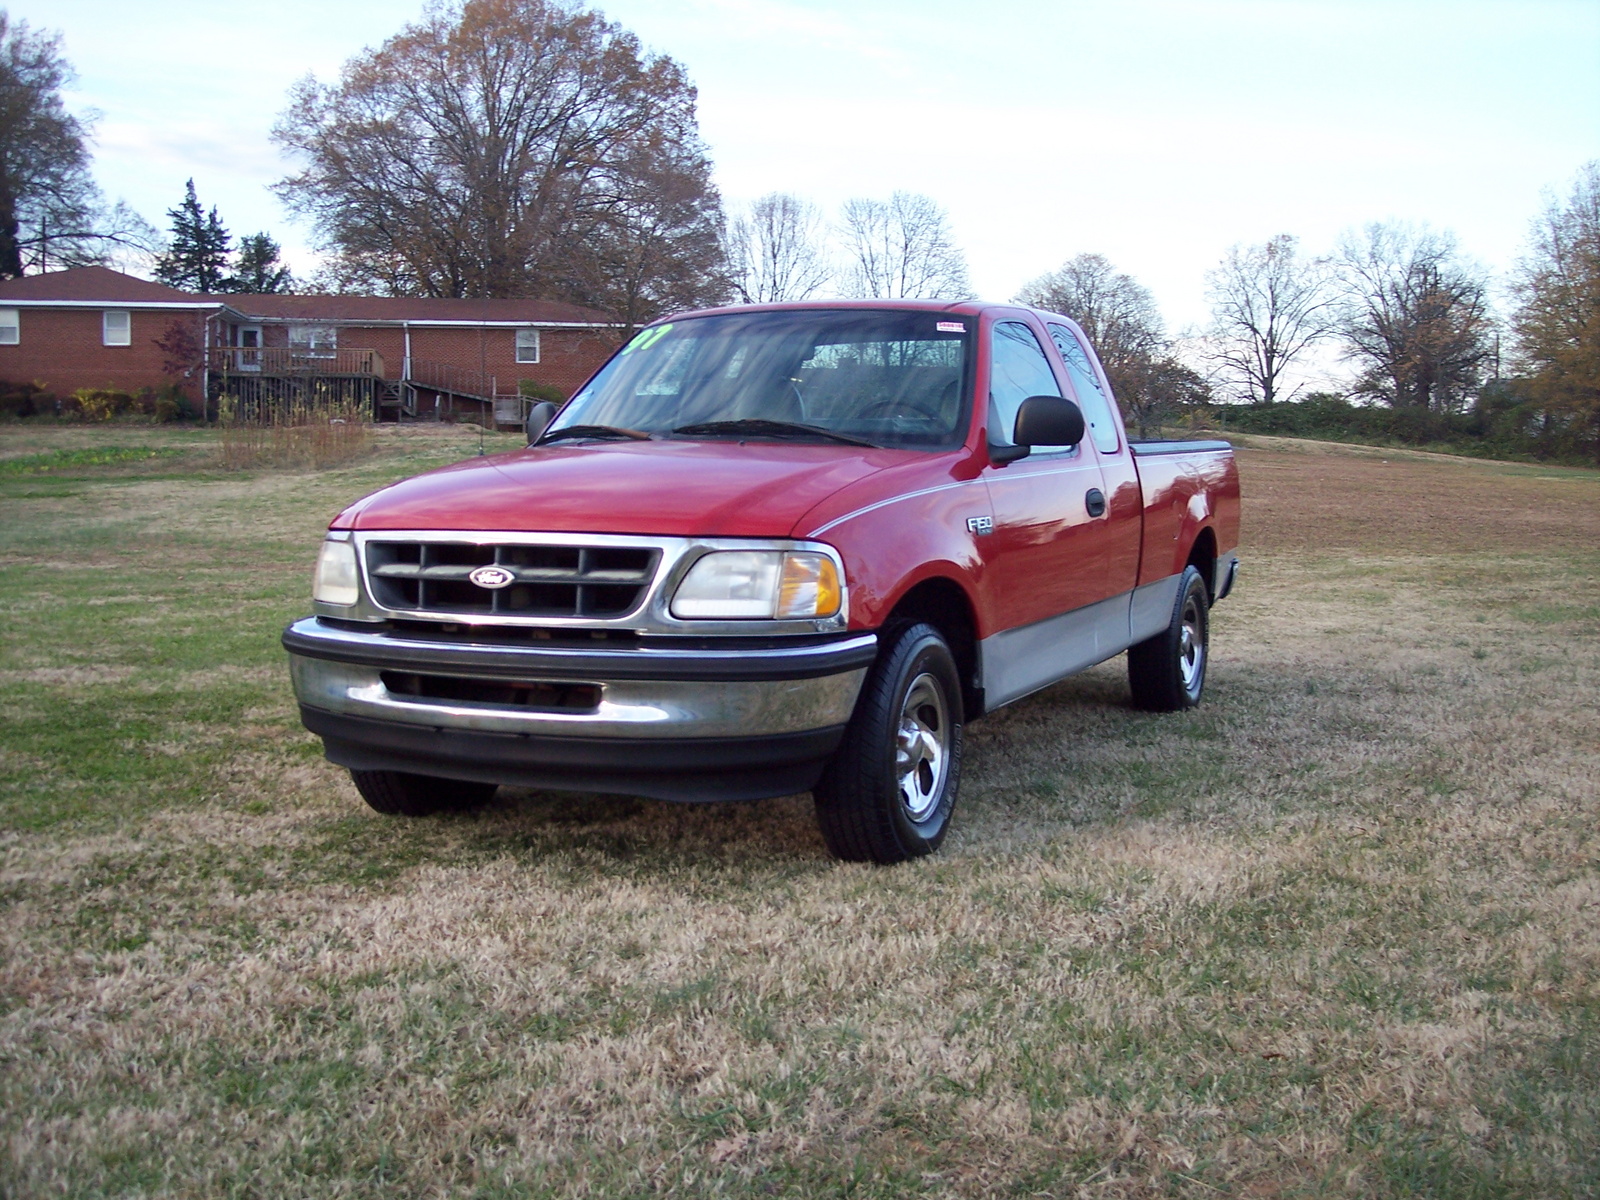 1997 Ford f150 extended cab review #4